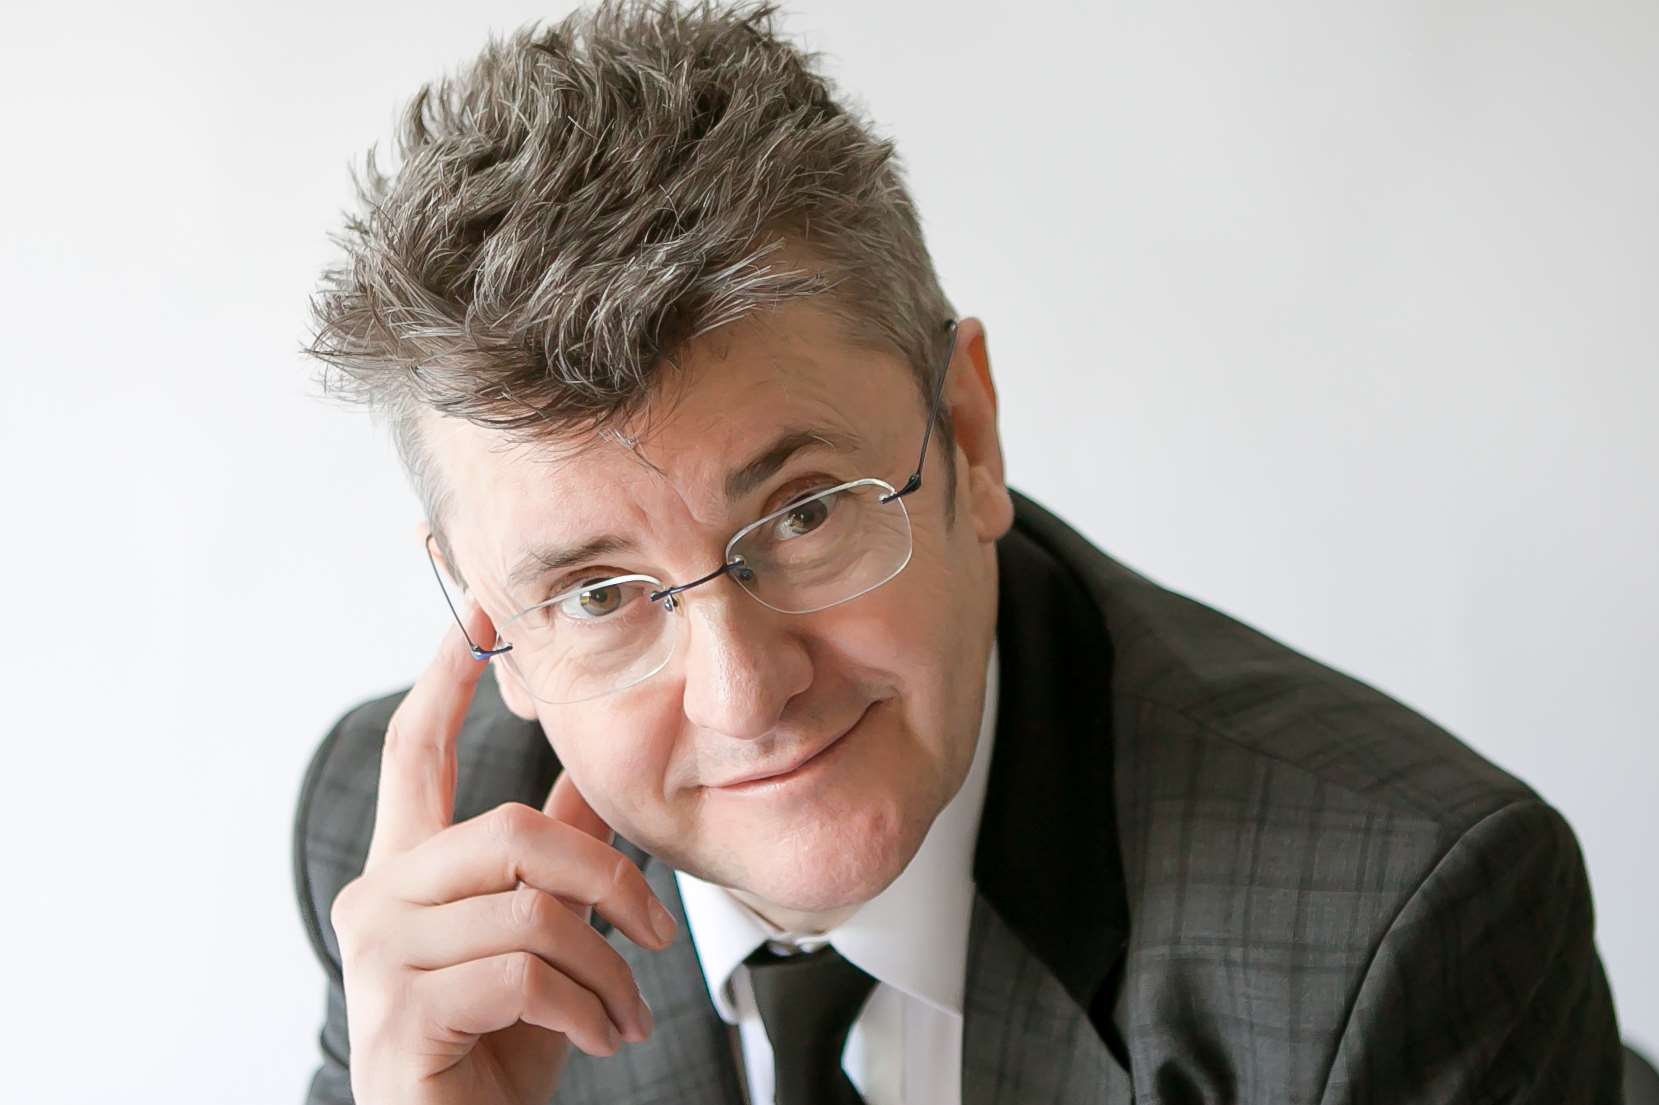 Higham-based comedian Joe Pasquale is playing Frank Spencer